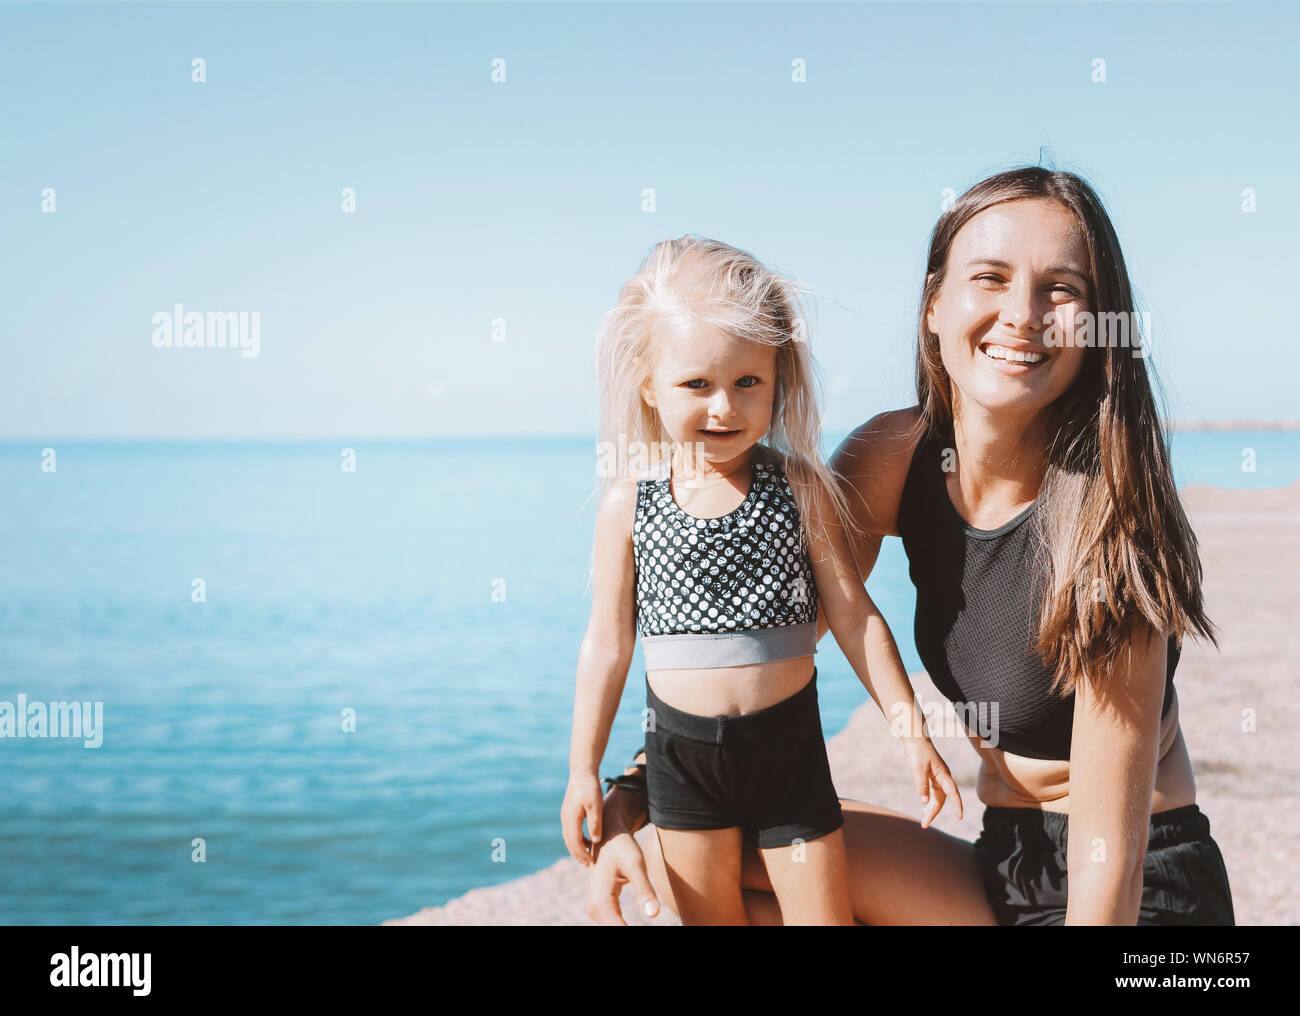 Young fit woman mom with little cute girl exercising on sea beach together, healthy lifestyle Stock Photo